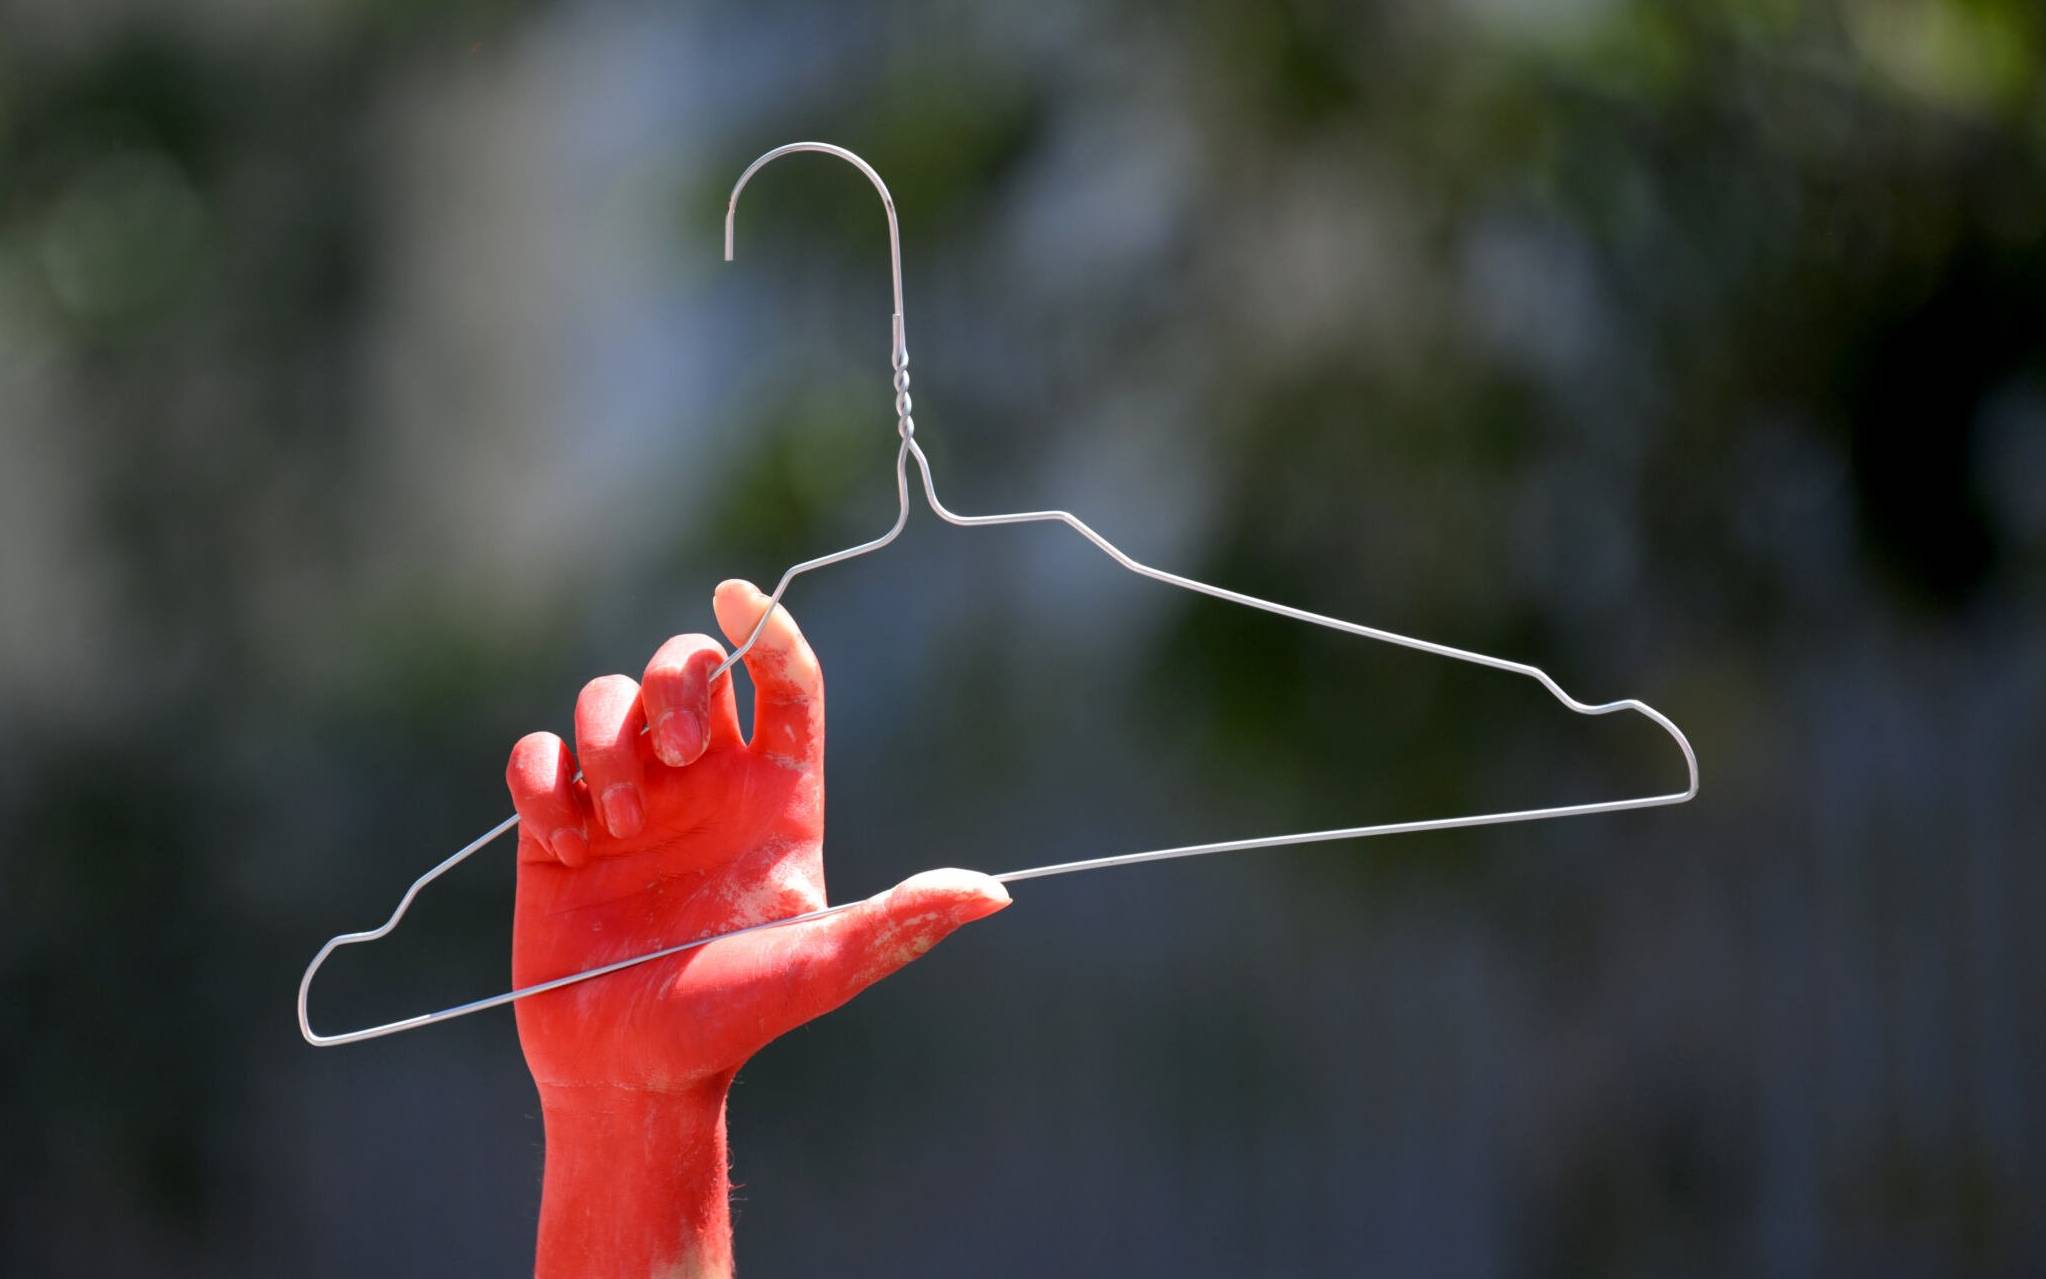 A participant with a bloody hand holds a clothes hanger in reference to abortion during the annual Pride Parade in Marseille, southern France, on July 2, 2022. (Photo by Nicolas TUCAT / AFP)